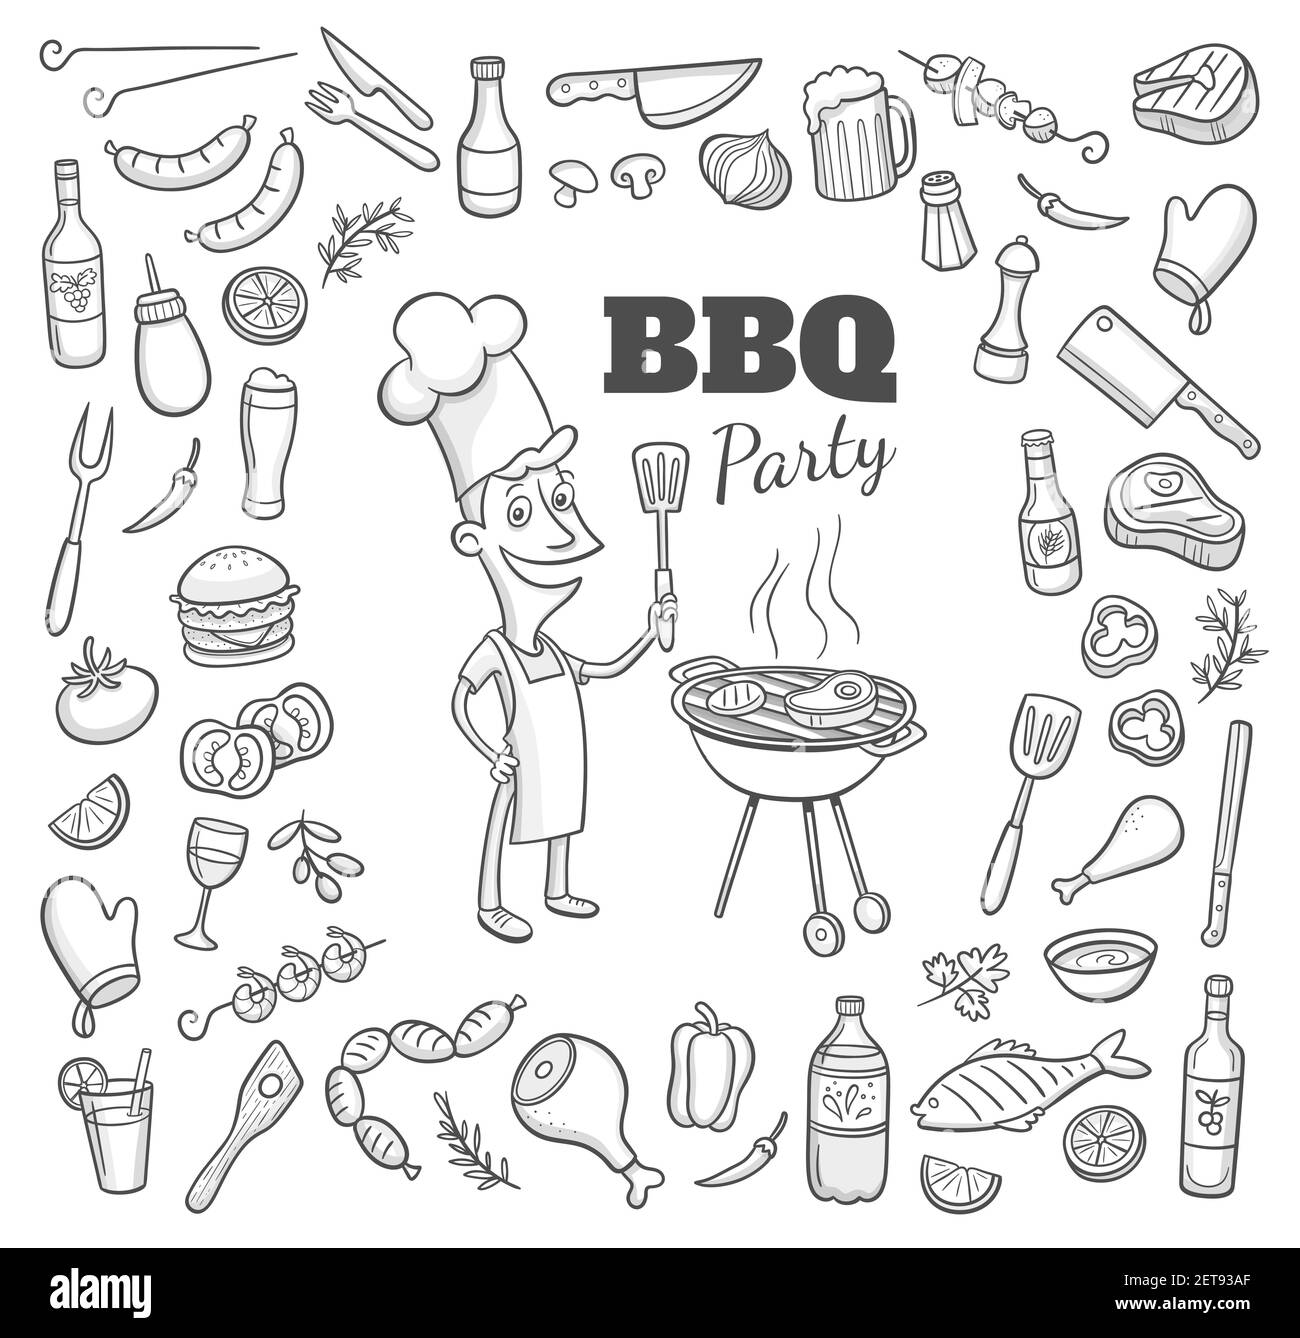 Collection of hand drawn BBQ party elements and a cartoony chef cooking in a barbecue. Vector illustration. Stock Vector